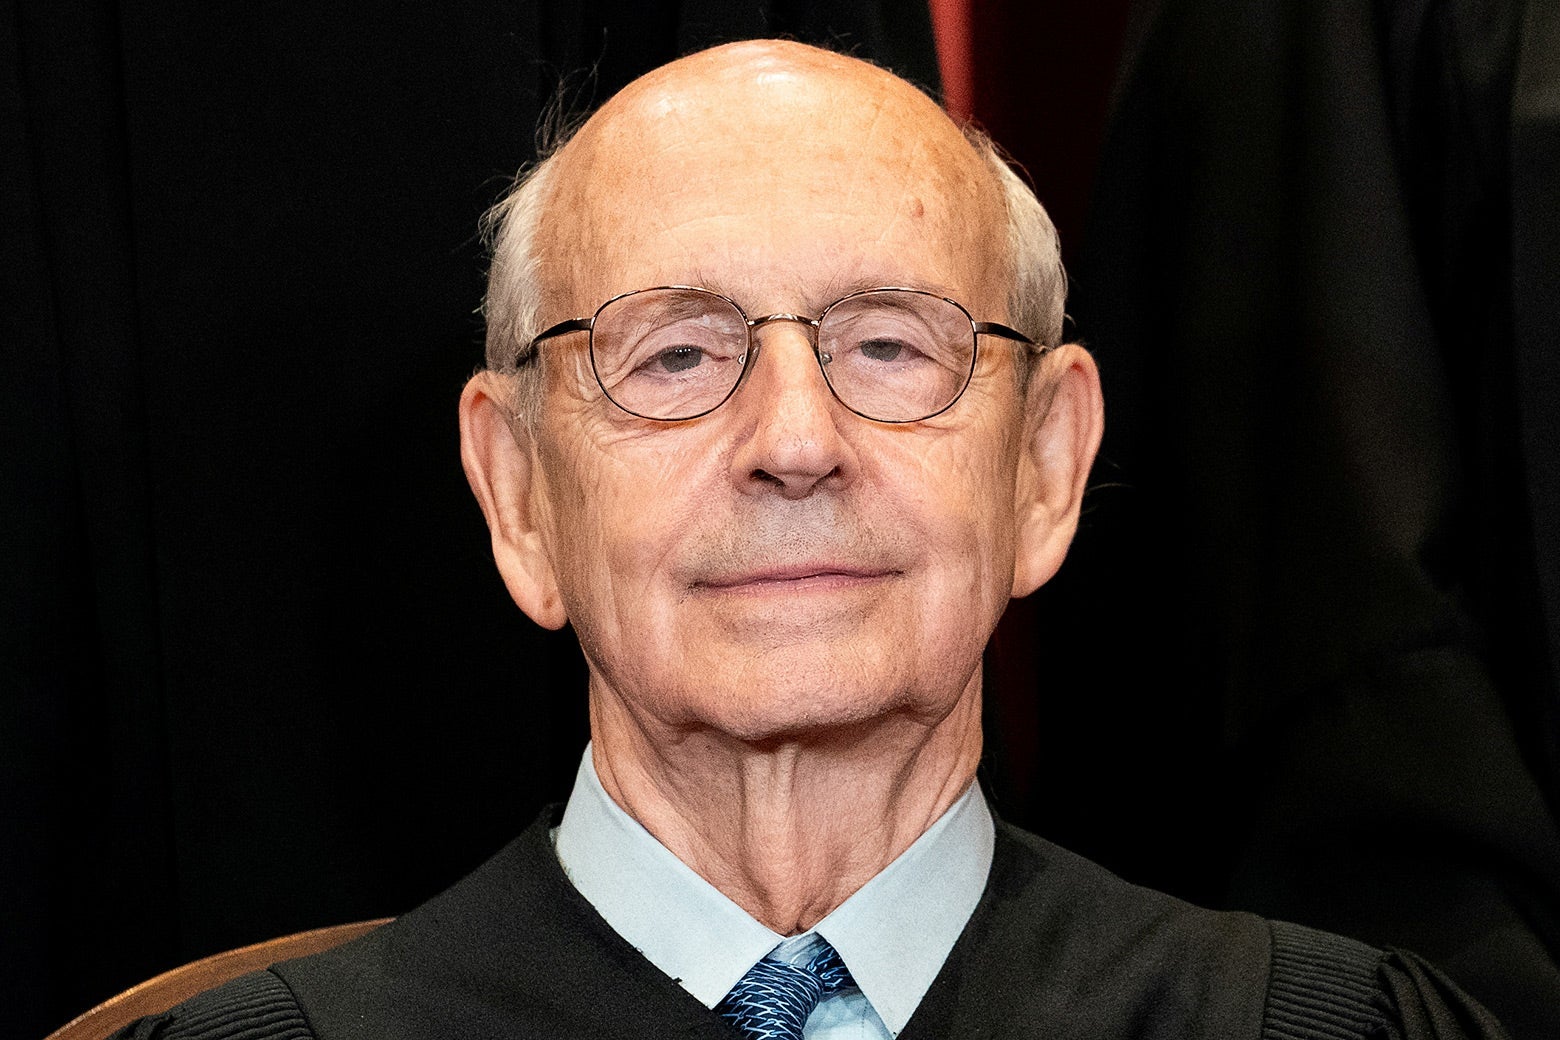 Breyer in his robes smiling for a photo